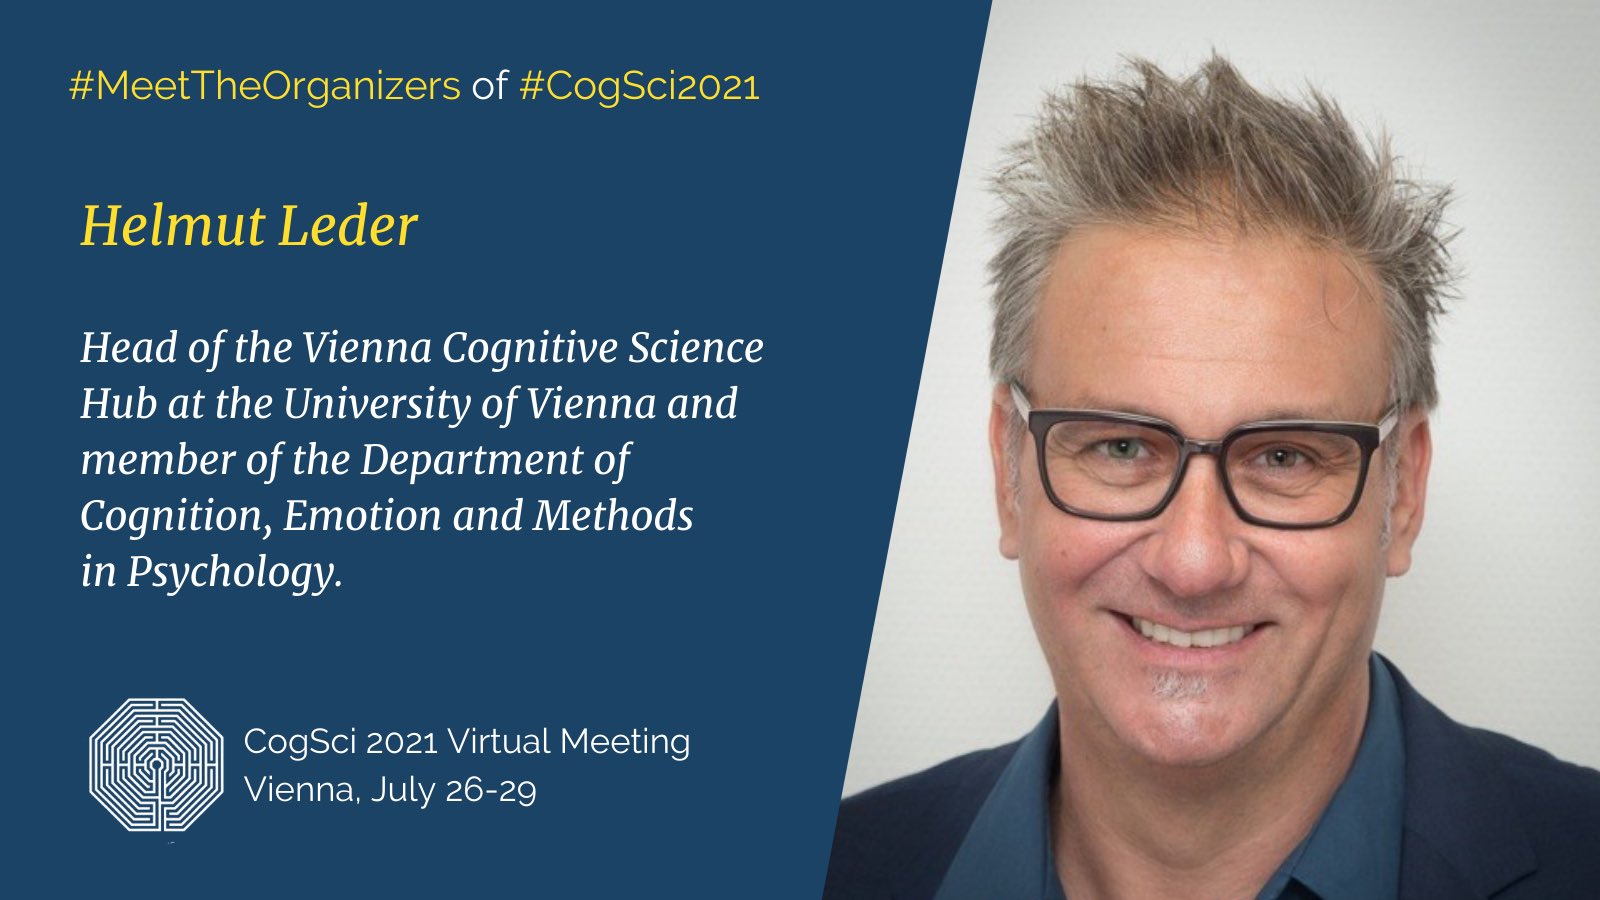 CogSci Society Twitter: "#MeetTheOrganizers of #CogSci2021 Helmut Leder @TumlehRedel is a professor of General and Cognitive Psychology and of the EVALab (The Research Focus Empirical Visual Aesthetics where human